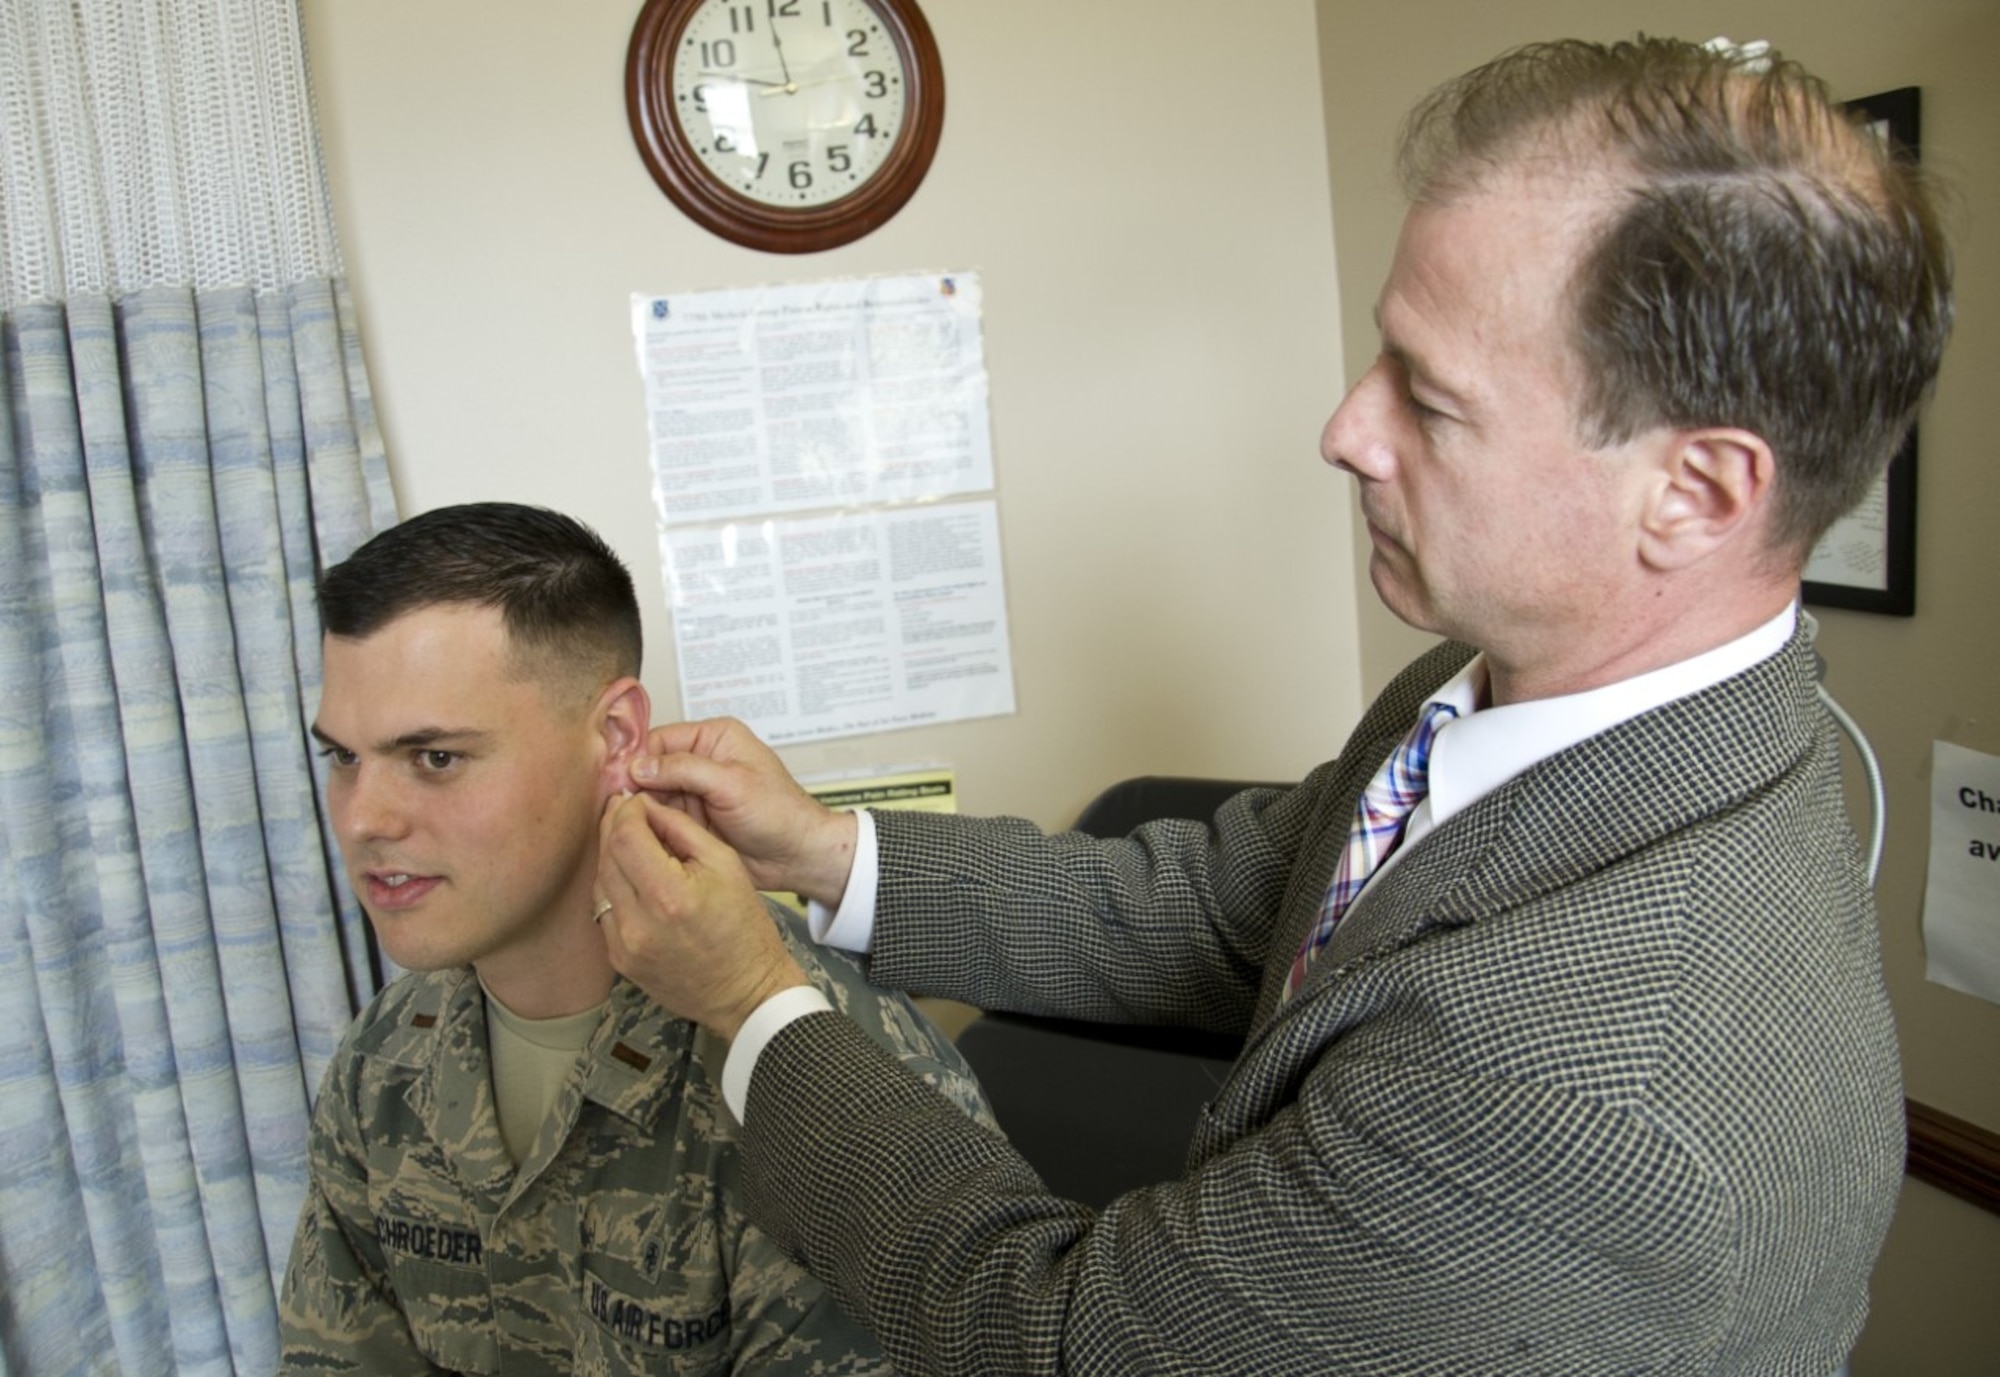 Dr. Thomas Piazza (right), U.S. Air Force Acupuncture Program director with the 779th Medical Group, inserts a semi-permanent acupuncture needle, or ASP, into the ear of 2nd Lt. Paul Schroeder, a Uniformed Services University student working with Dr. Piazza March 28, 2017, at Joint Base Andrews, Md. Piazza works with others at the Air Force Acupuncture and Integrative Medicine Clinic, the Department of Defense’s only acupuncture therapy facility with a full time, licensed acupuncture staff of physicians. (U.S. Air Force photo by Staff Sgt. Joe Yanik)